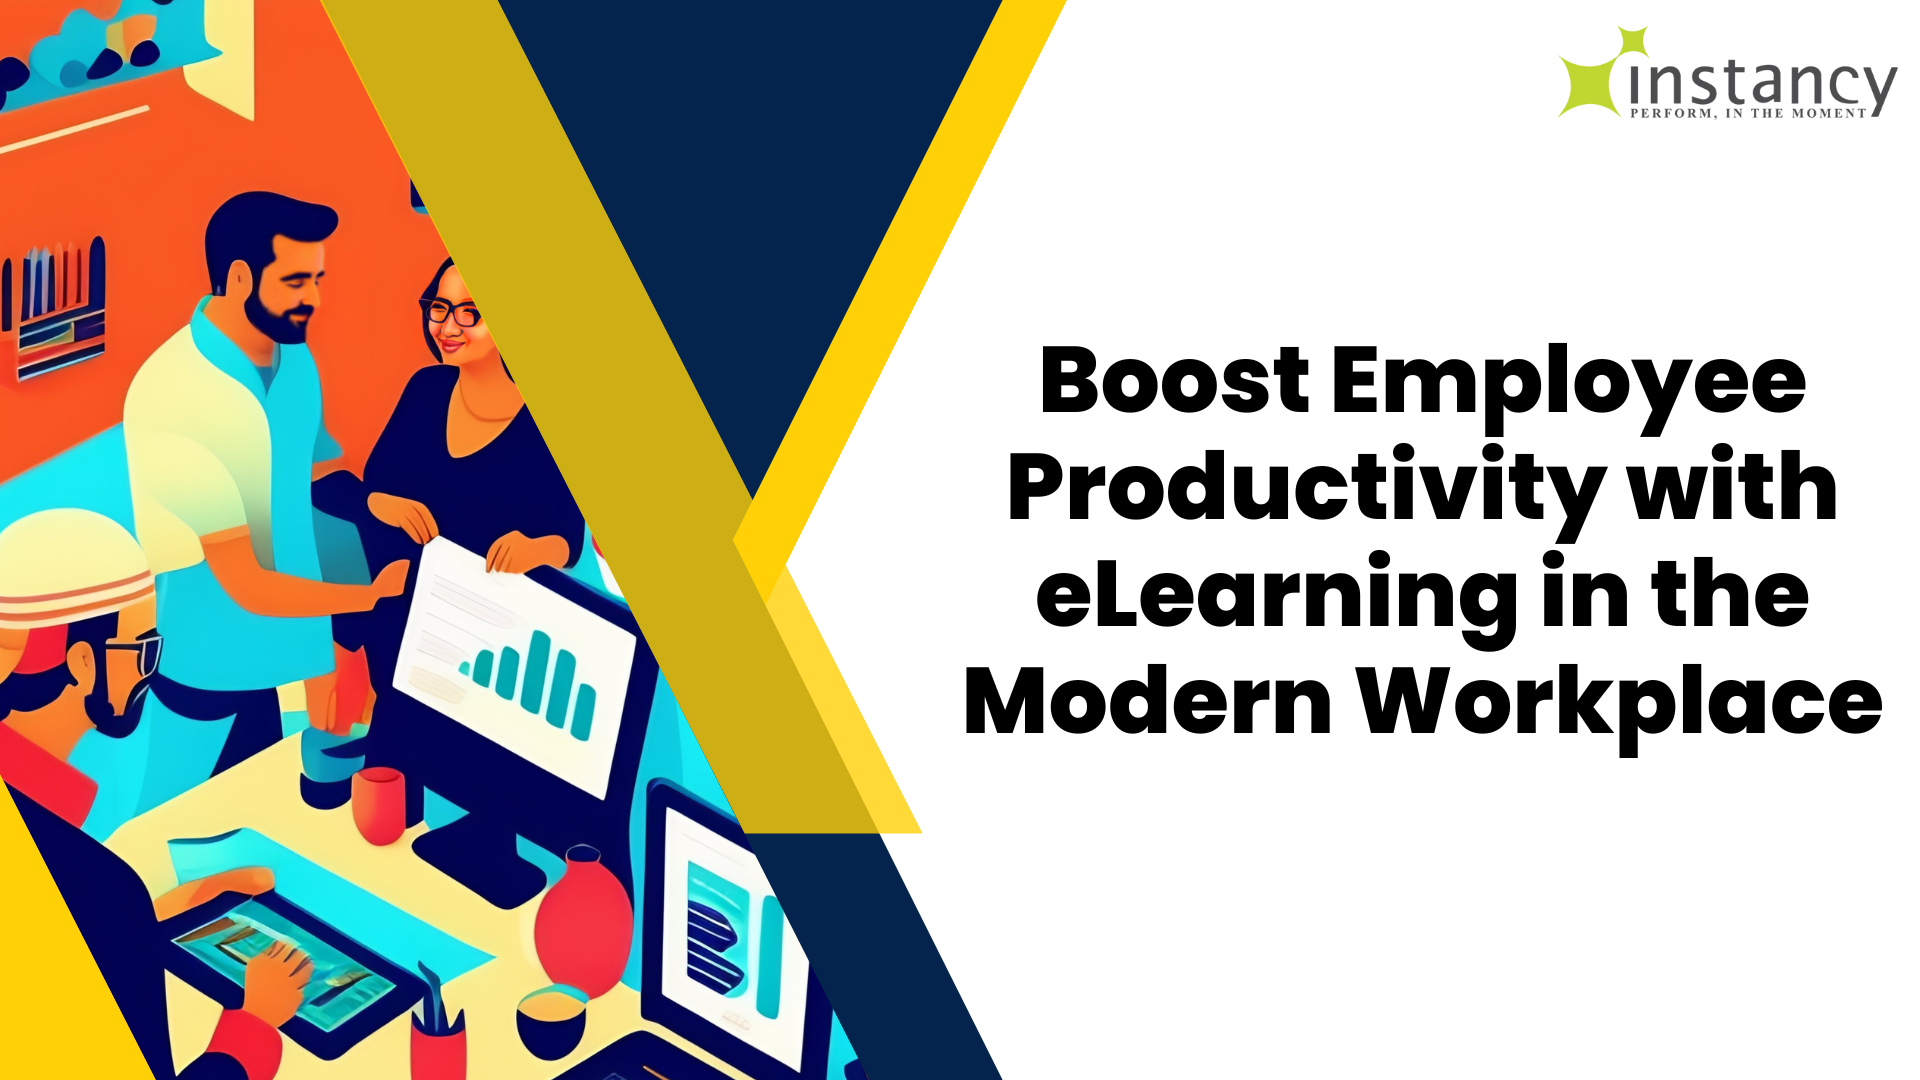 Boost Employee Productivity with eLearning in the Modern Workplace